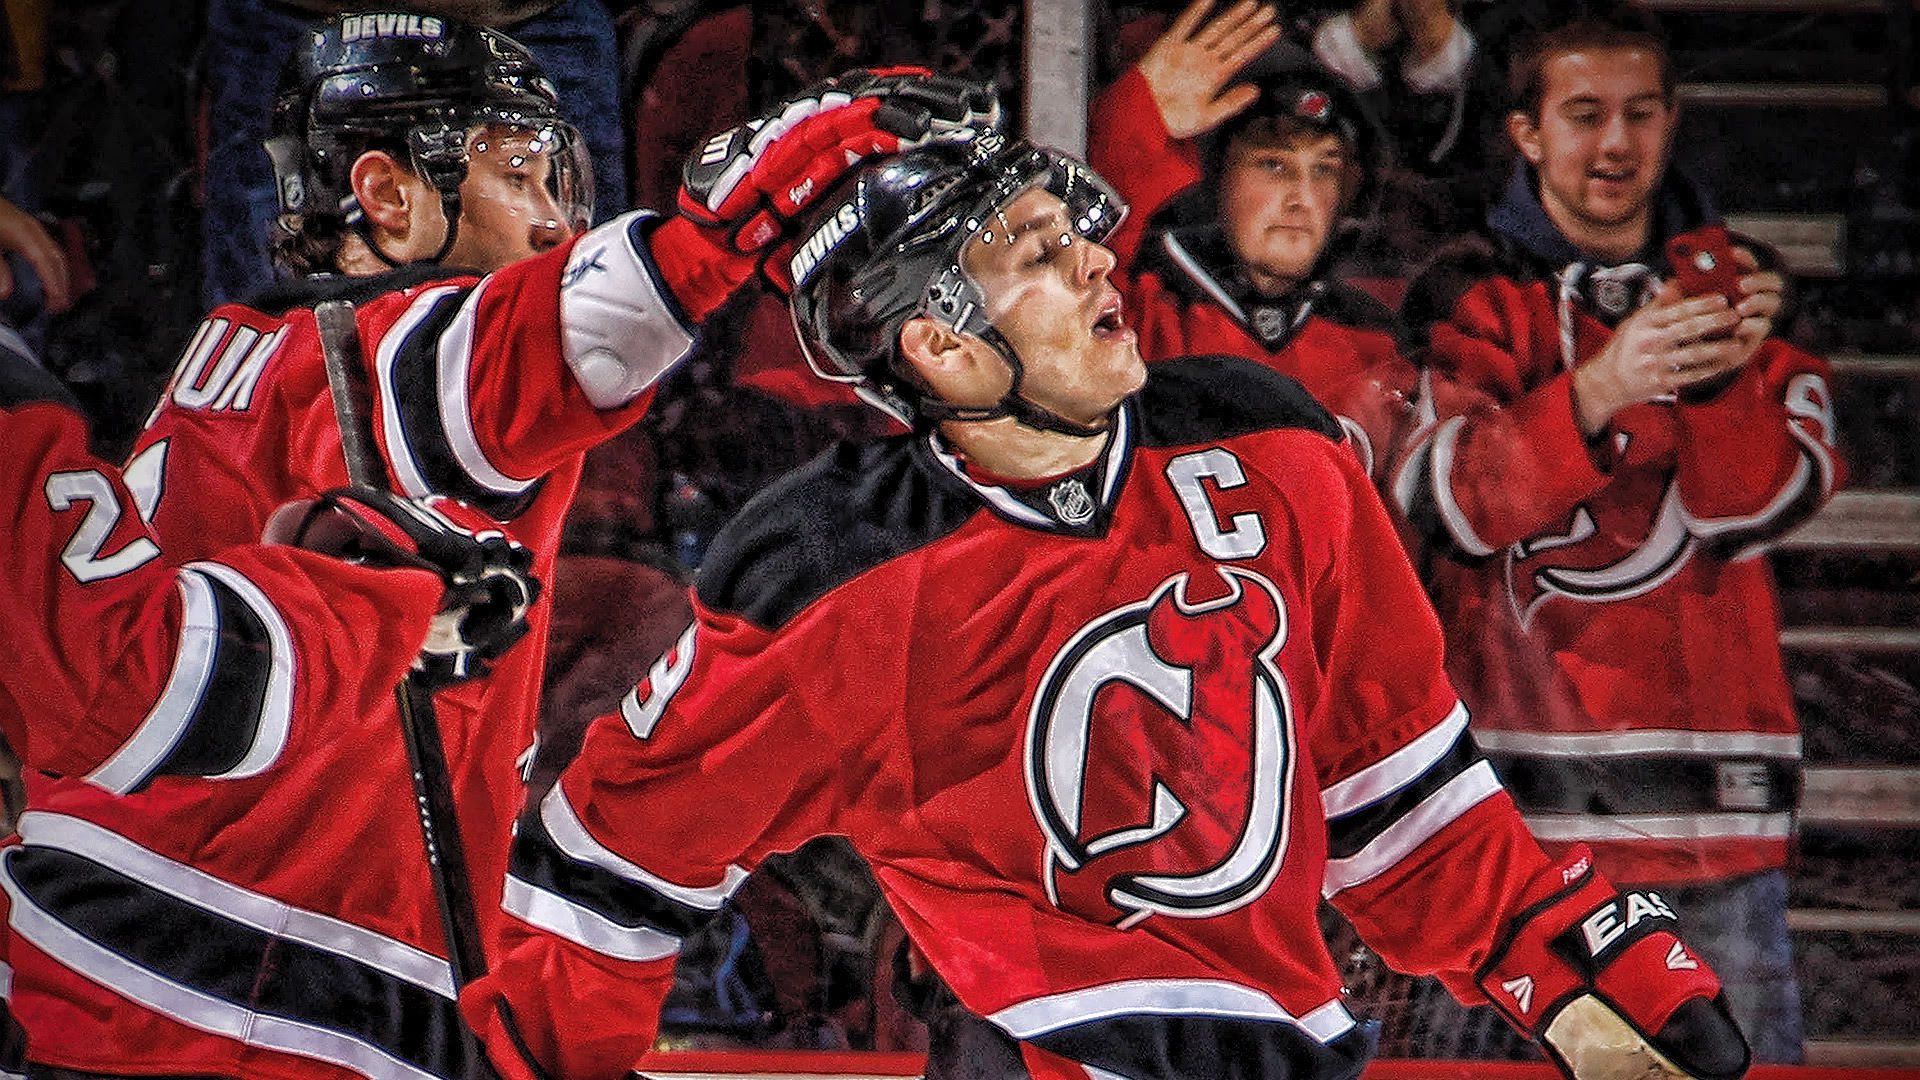 Player of NHL Zach Parise wallpapers and images - wallpapers ...